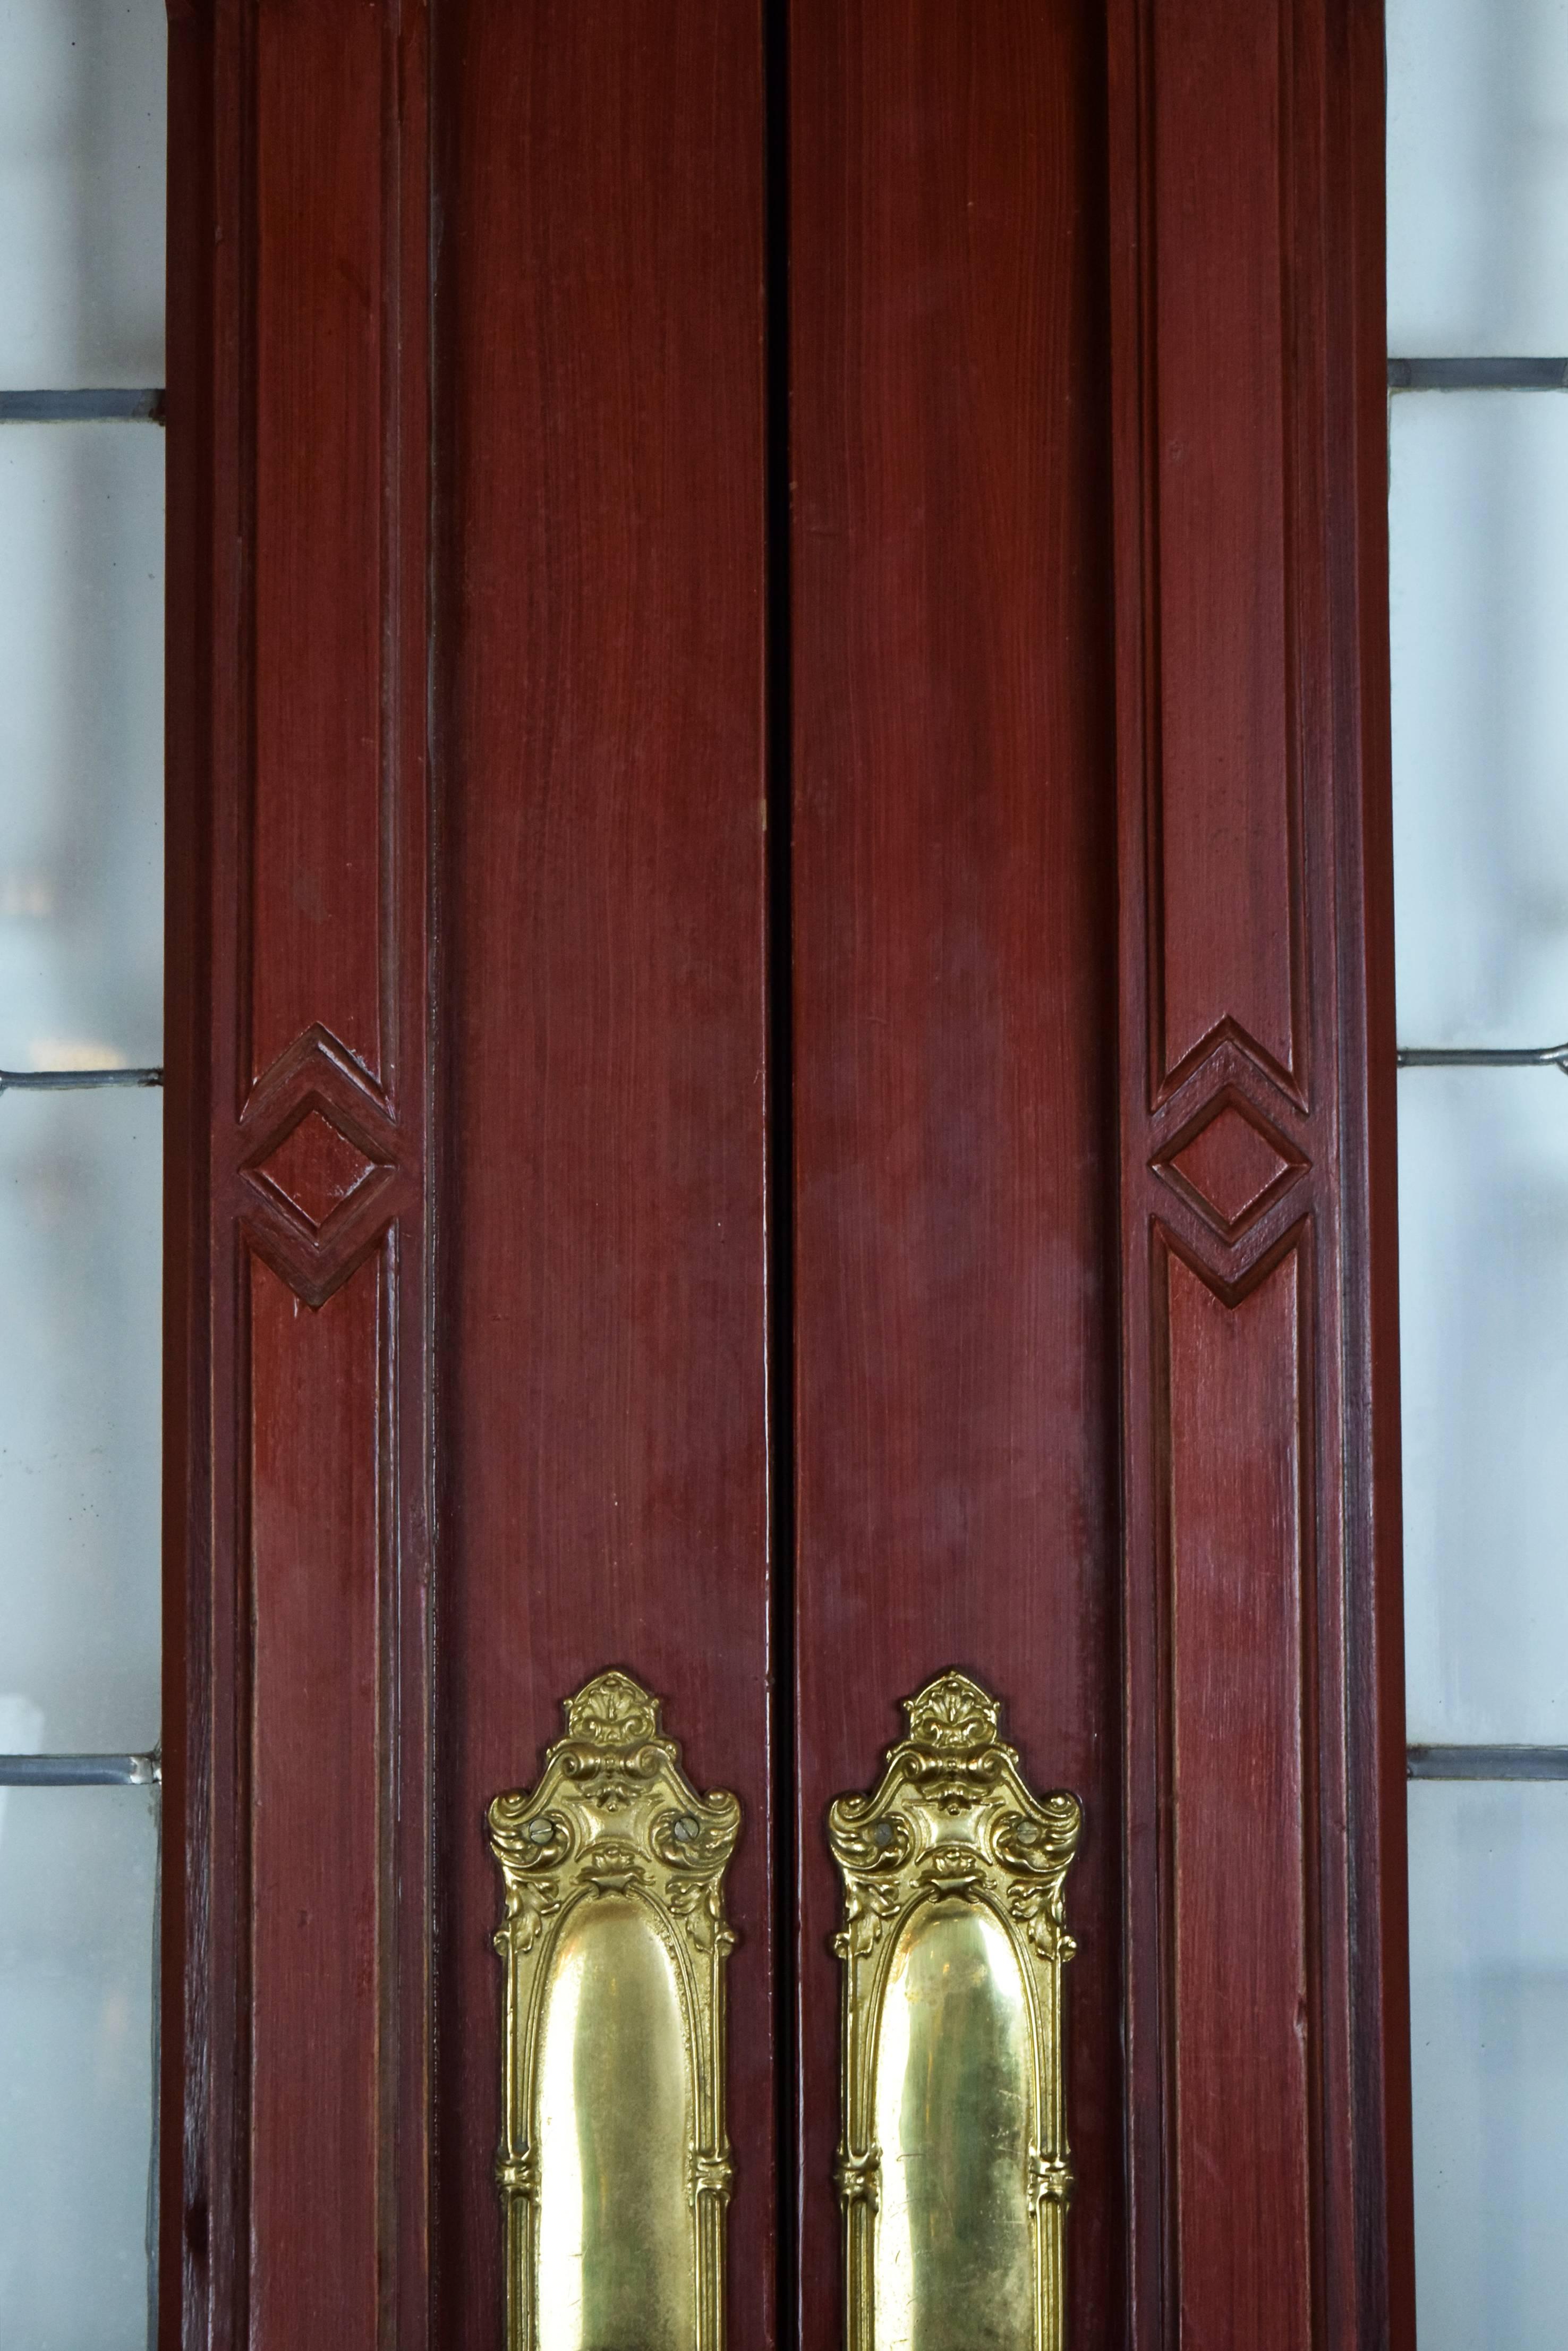 This entrance door set has beautiful beveled glass windows bordered by patterned woodwork, two beautiful, elaborate cast brass door plates reproduced especially for these doors and beautifully designed woodwork throughout. These doors would be a